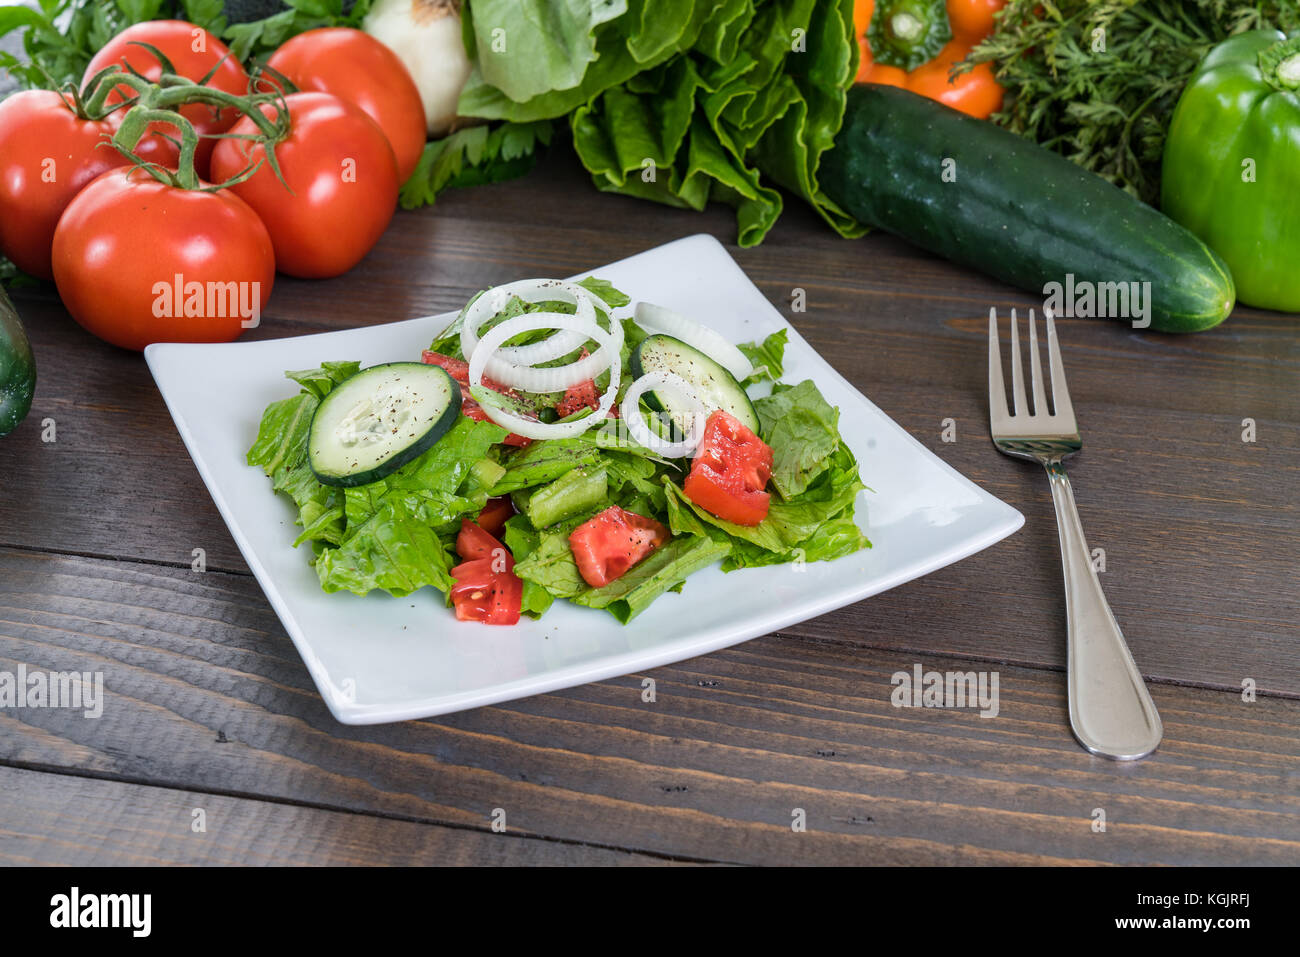 Fresh salad on wood table with vegetables Stock Photo